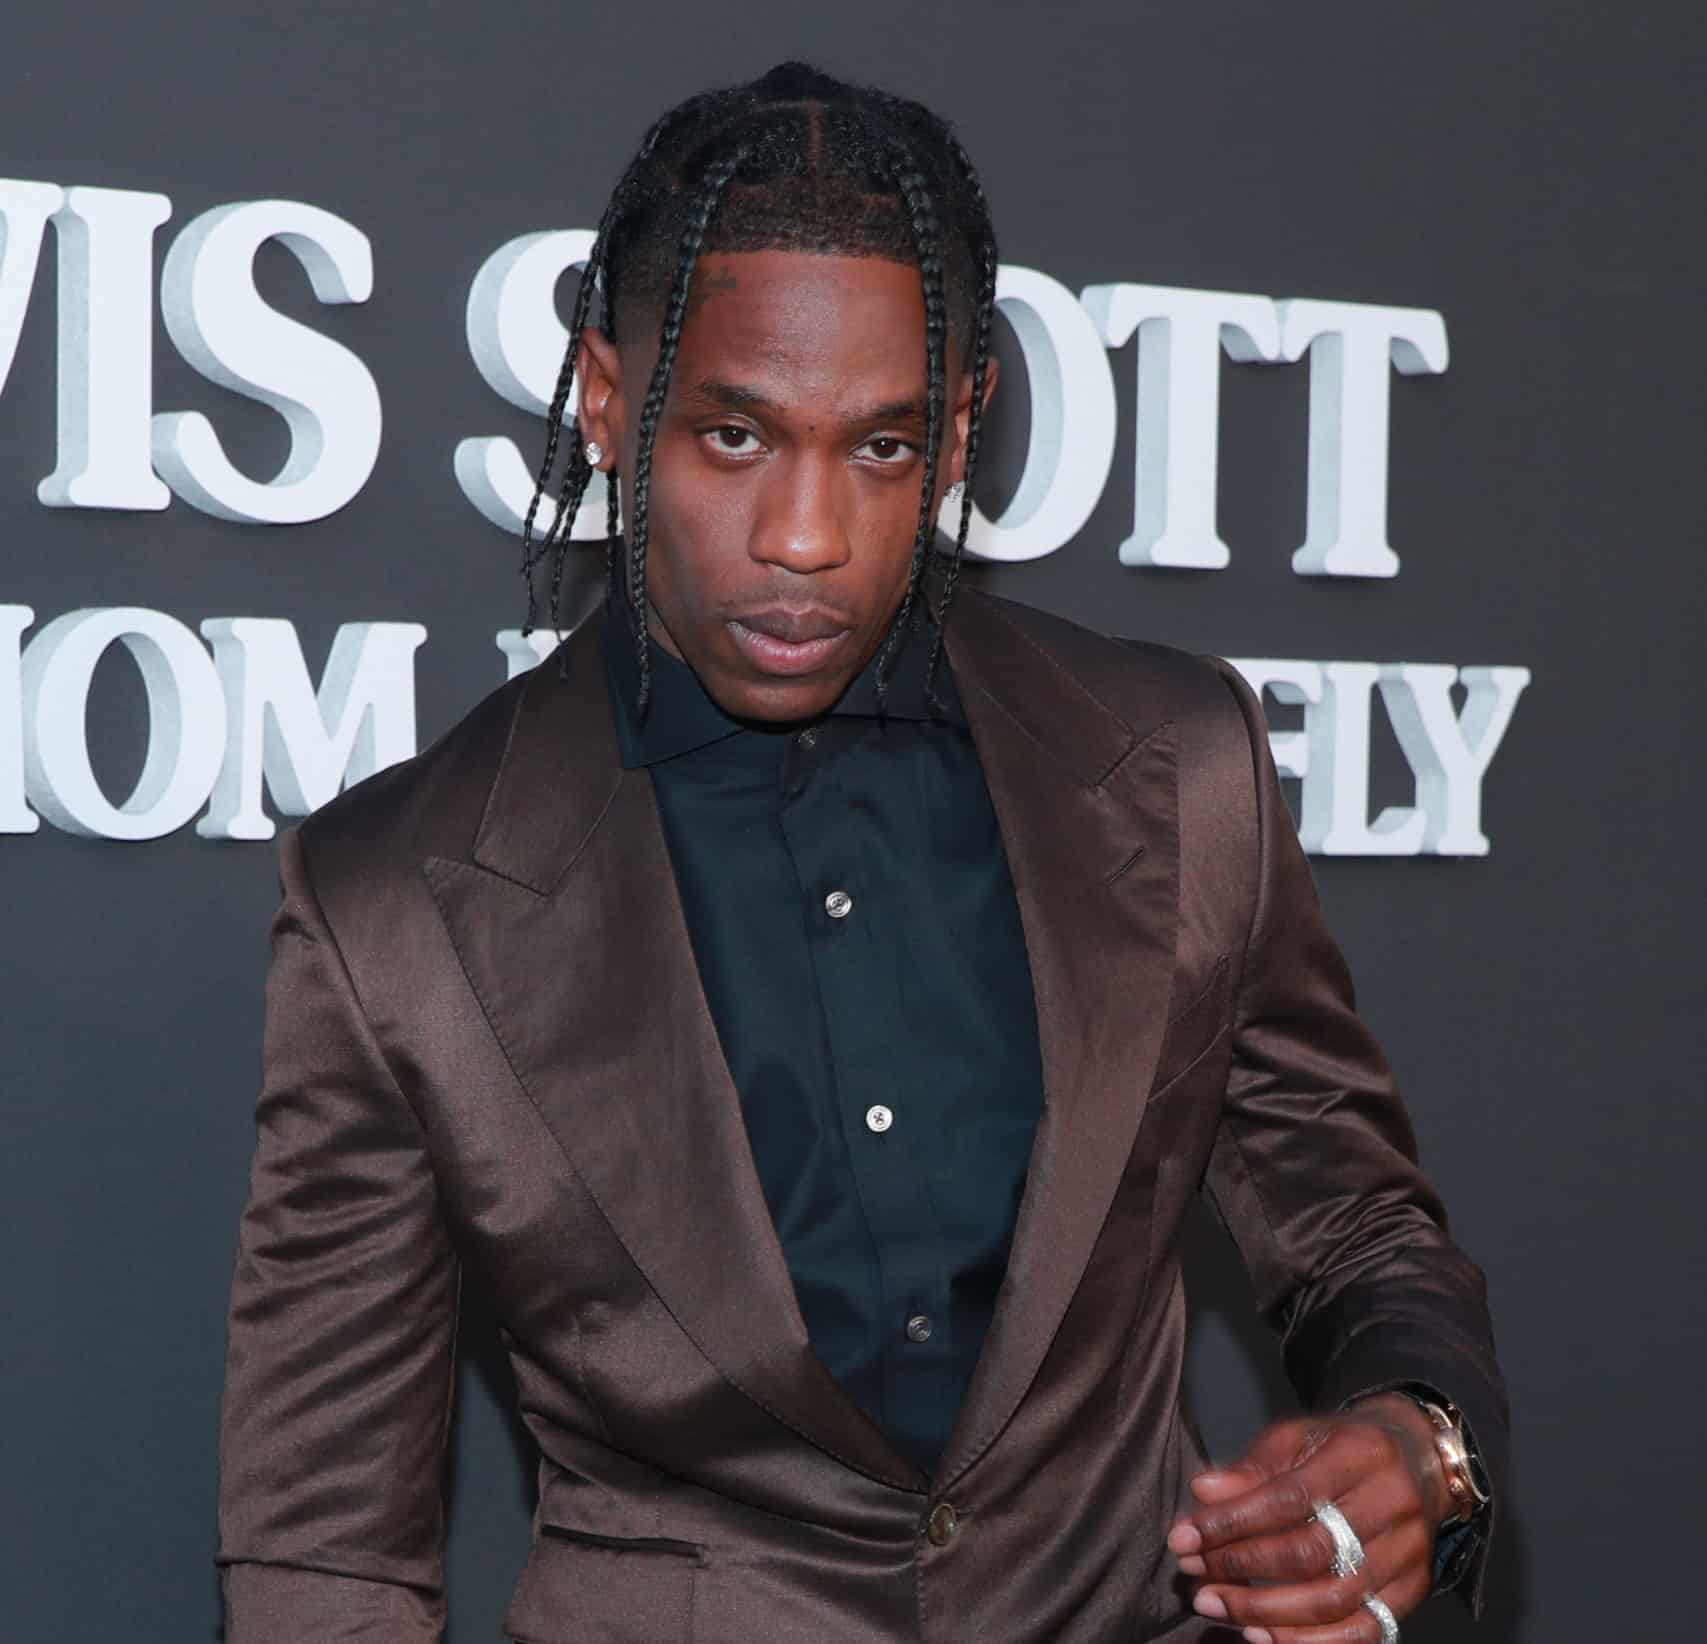 Travis Scott sits down with Charlamagne Tha God and speaks out for the tragic events that took place at this year's Astroworld Festival.